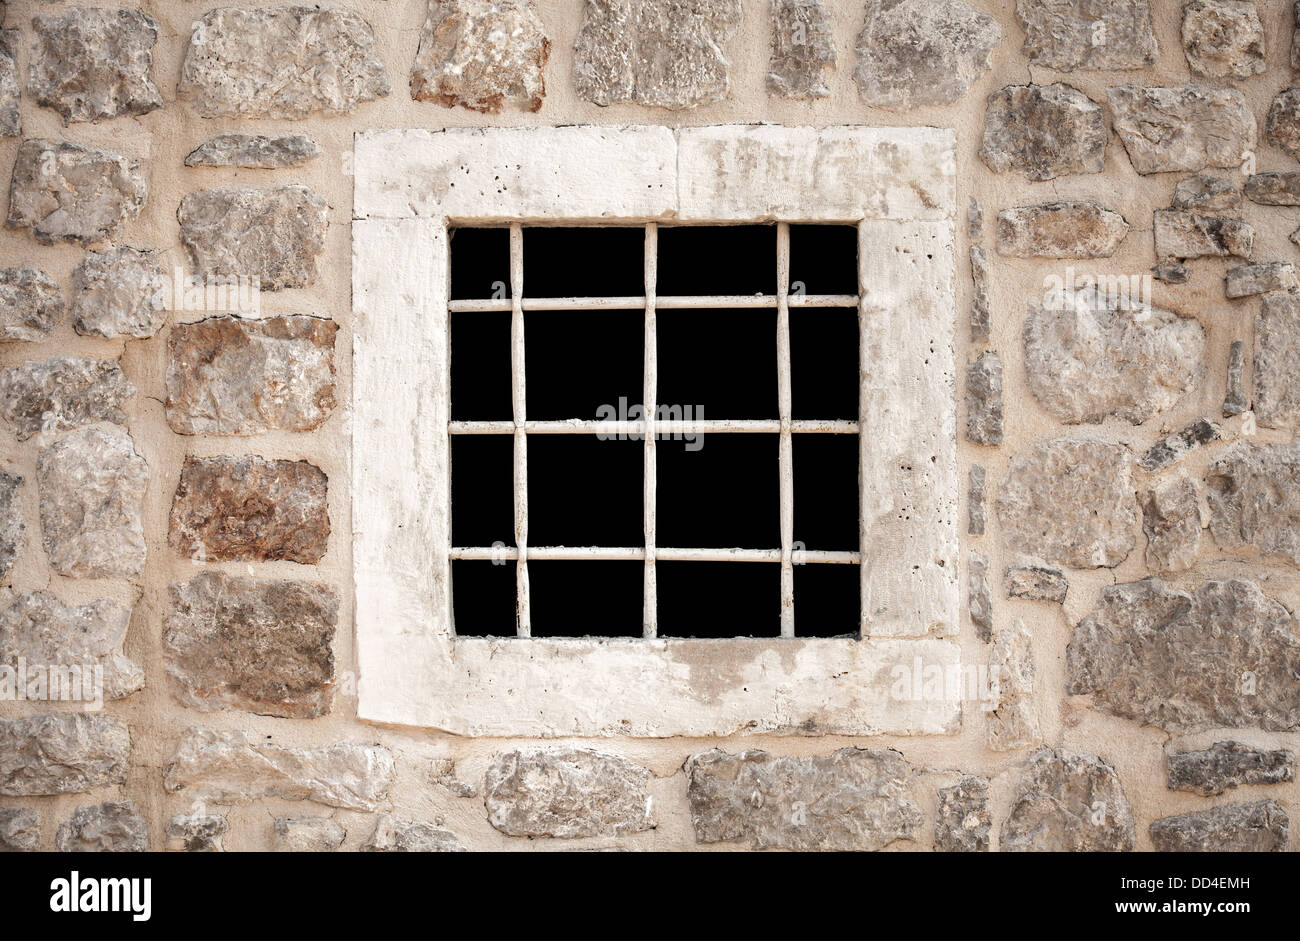 Ancient stone prison wall with metal window bars Stock Photo